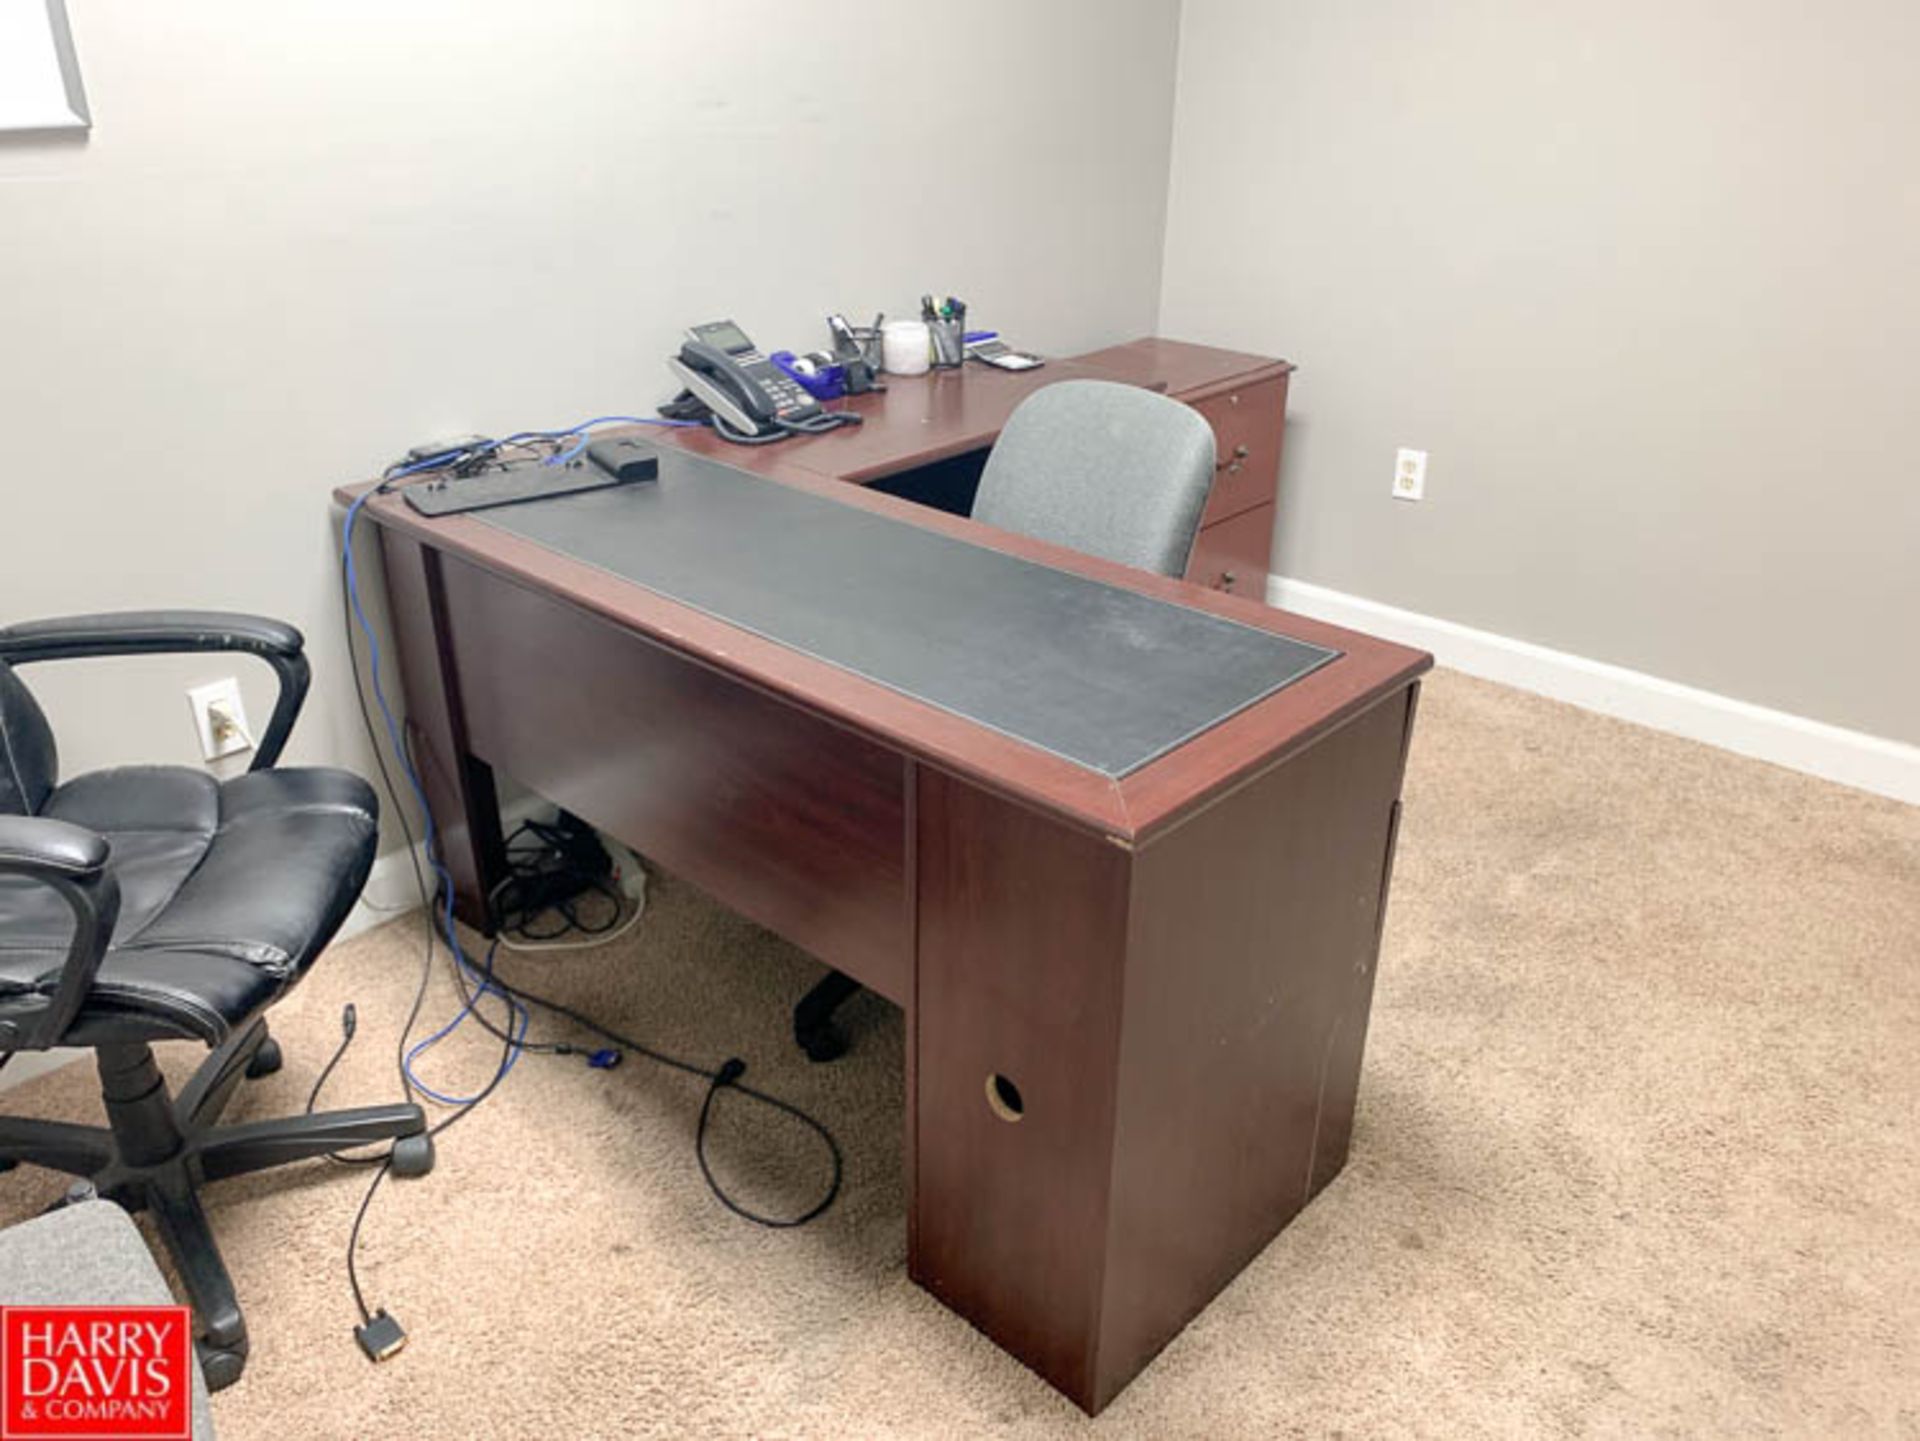 Desk, Chairs and White Board - Rigging Fee: $100